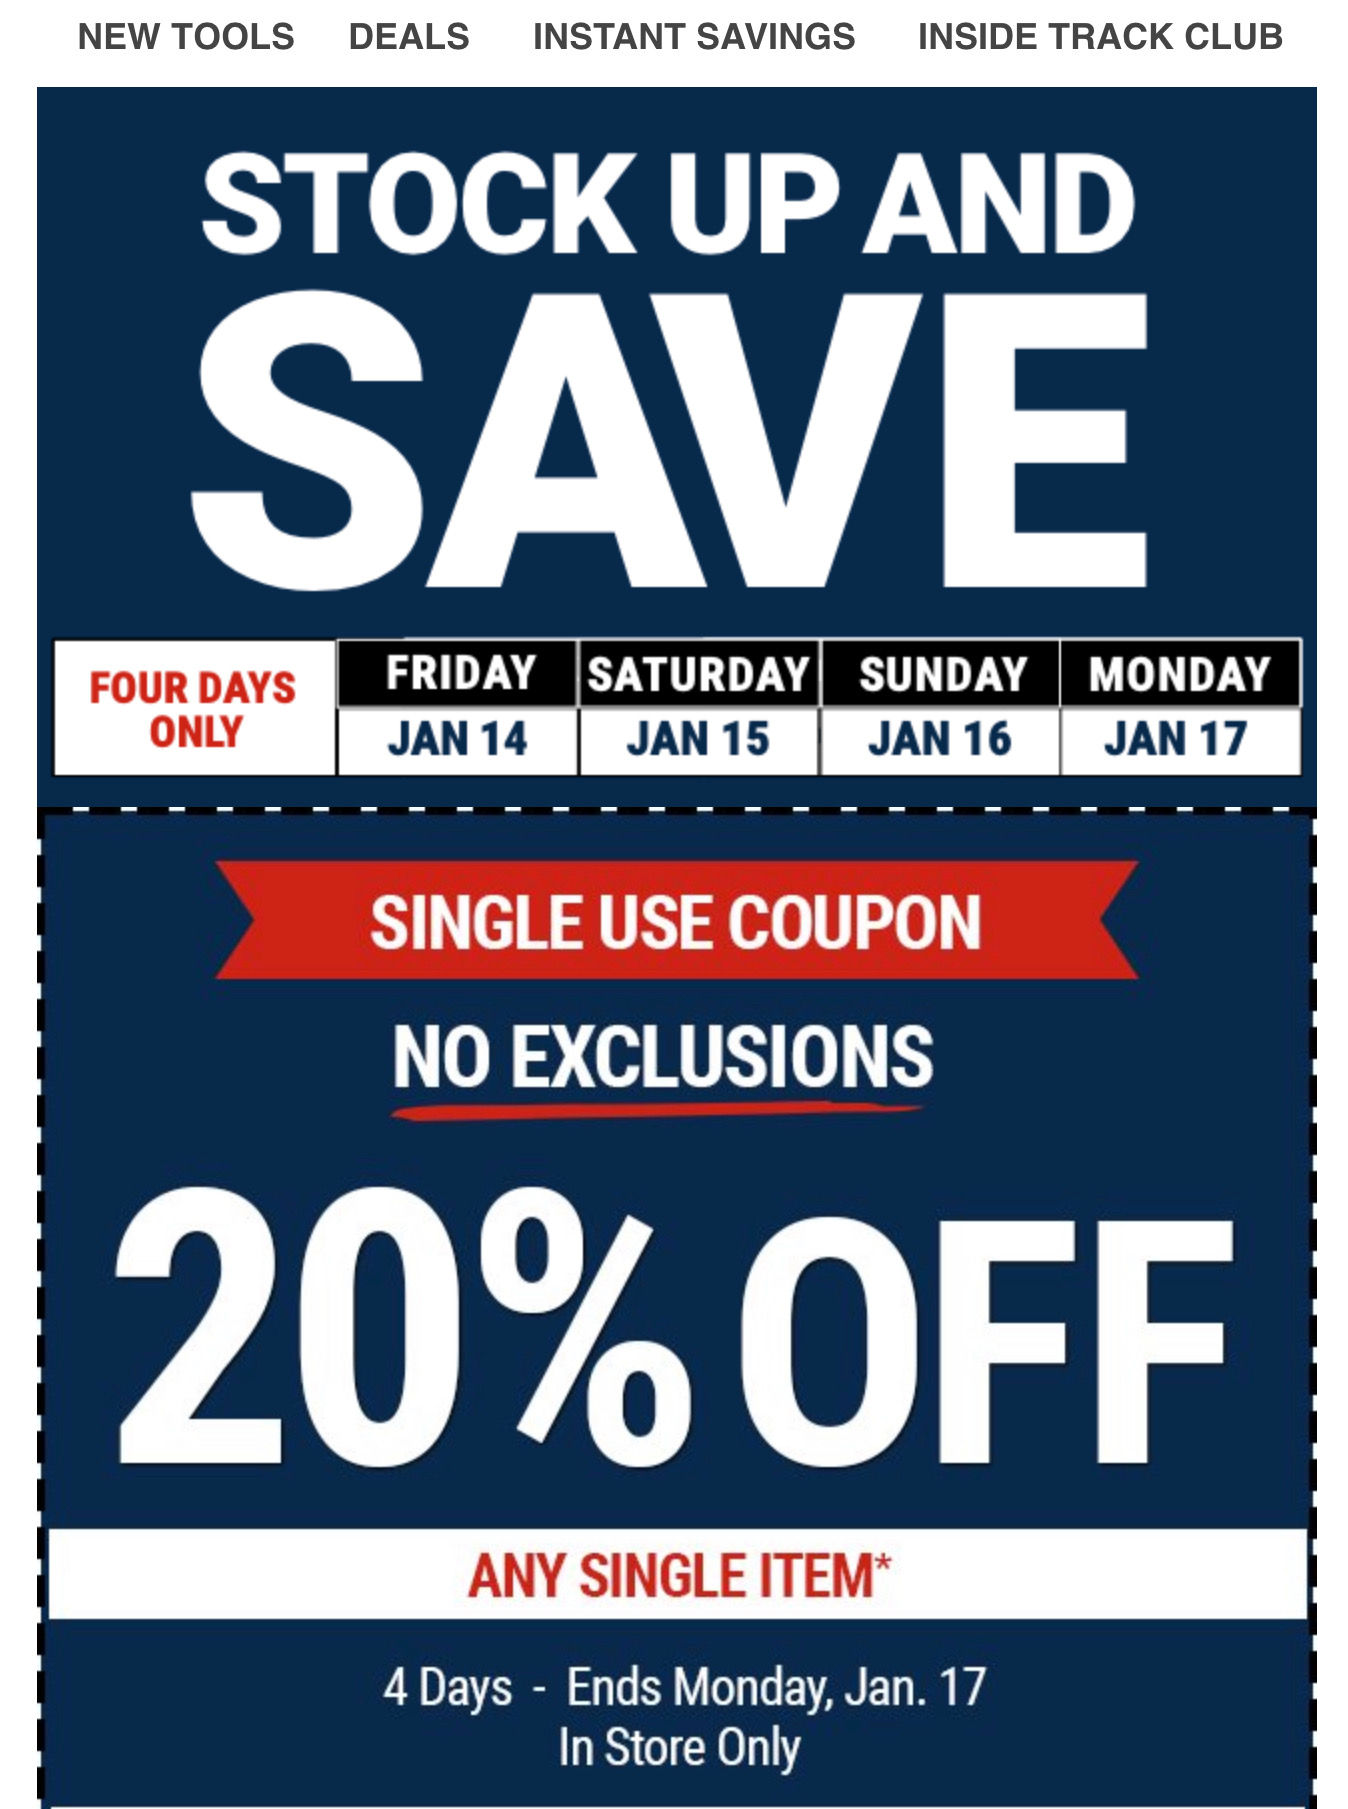 YMMV Harbor Freight 20% off. No exclusions one time use coupon in email. In store use only 01/14/22 - 01/17/22